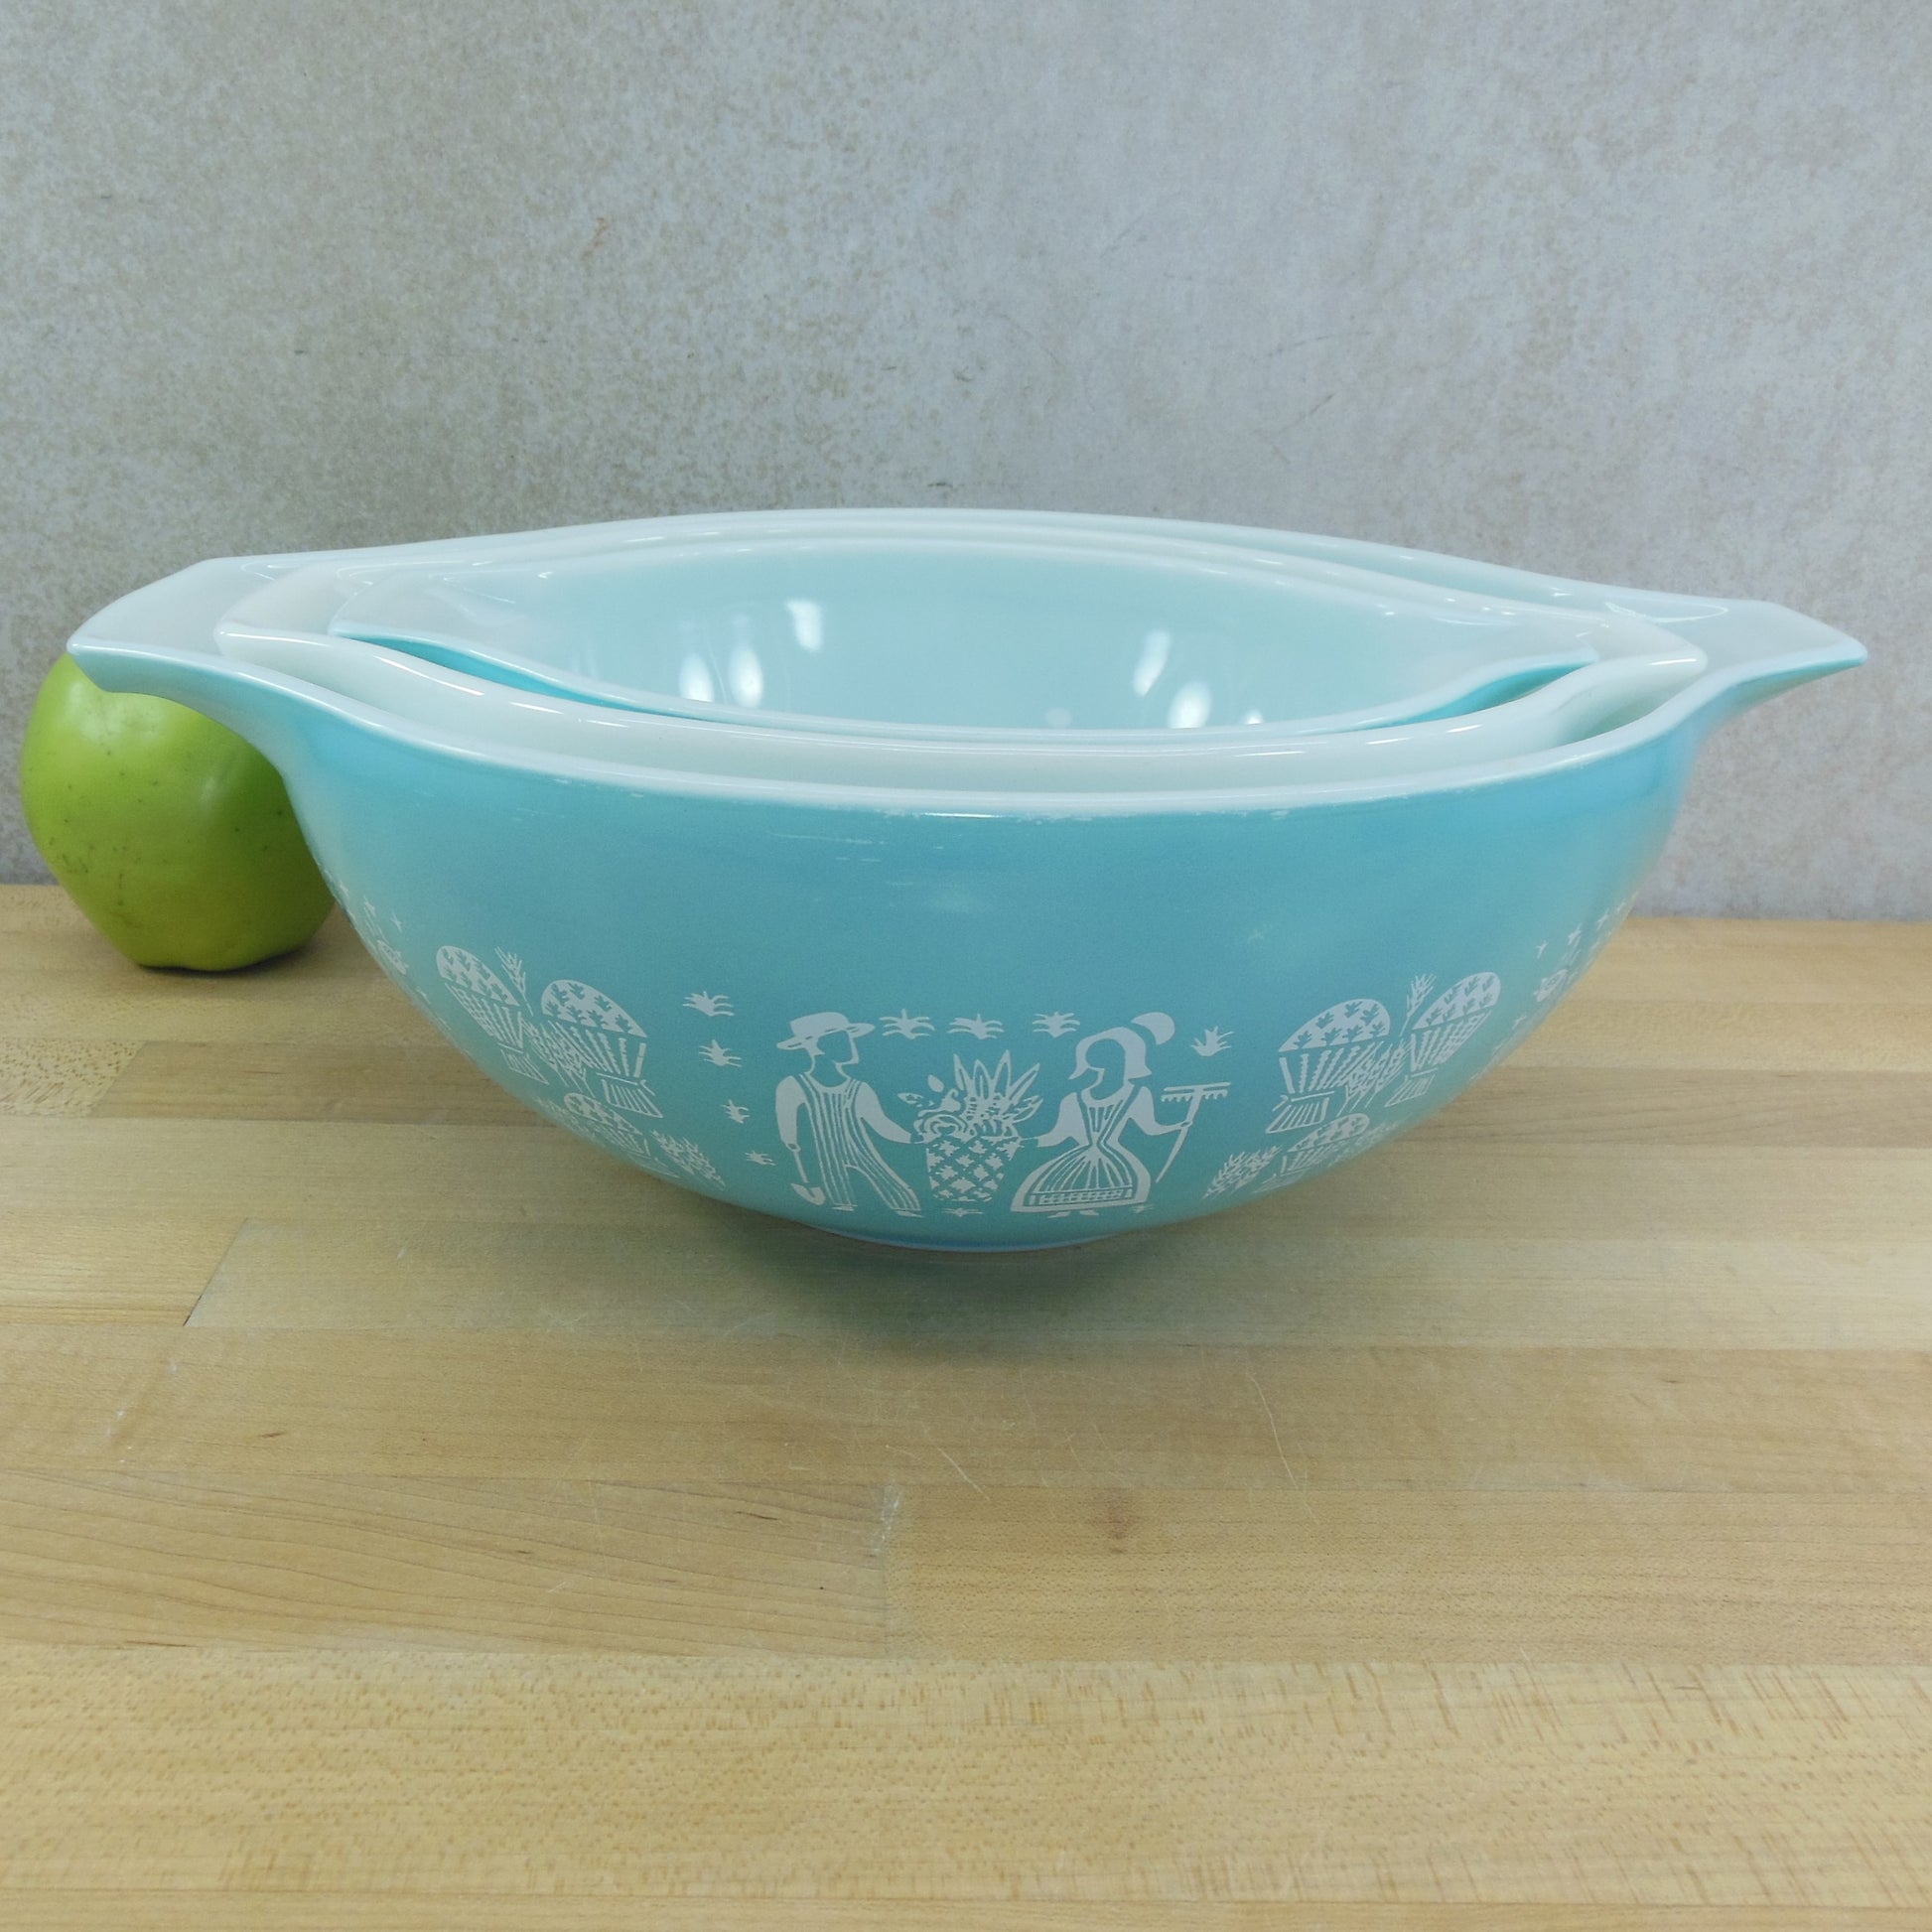 Buy the 2 Vintage Pyrex Glass Mixing Bowls